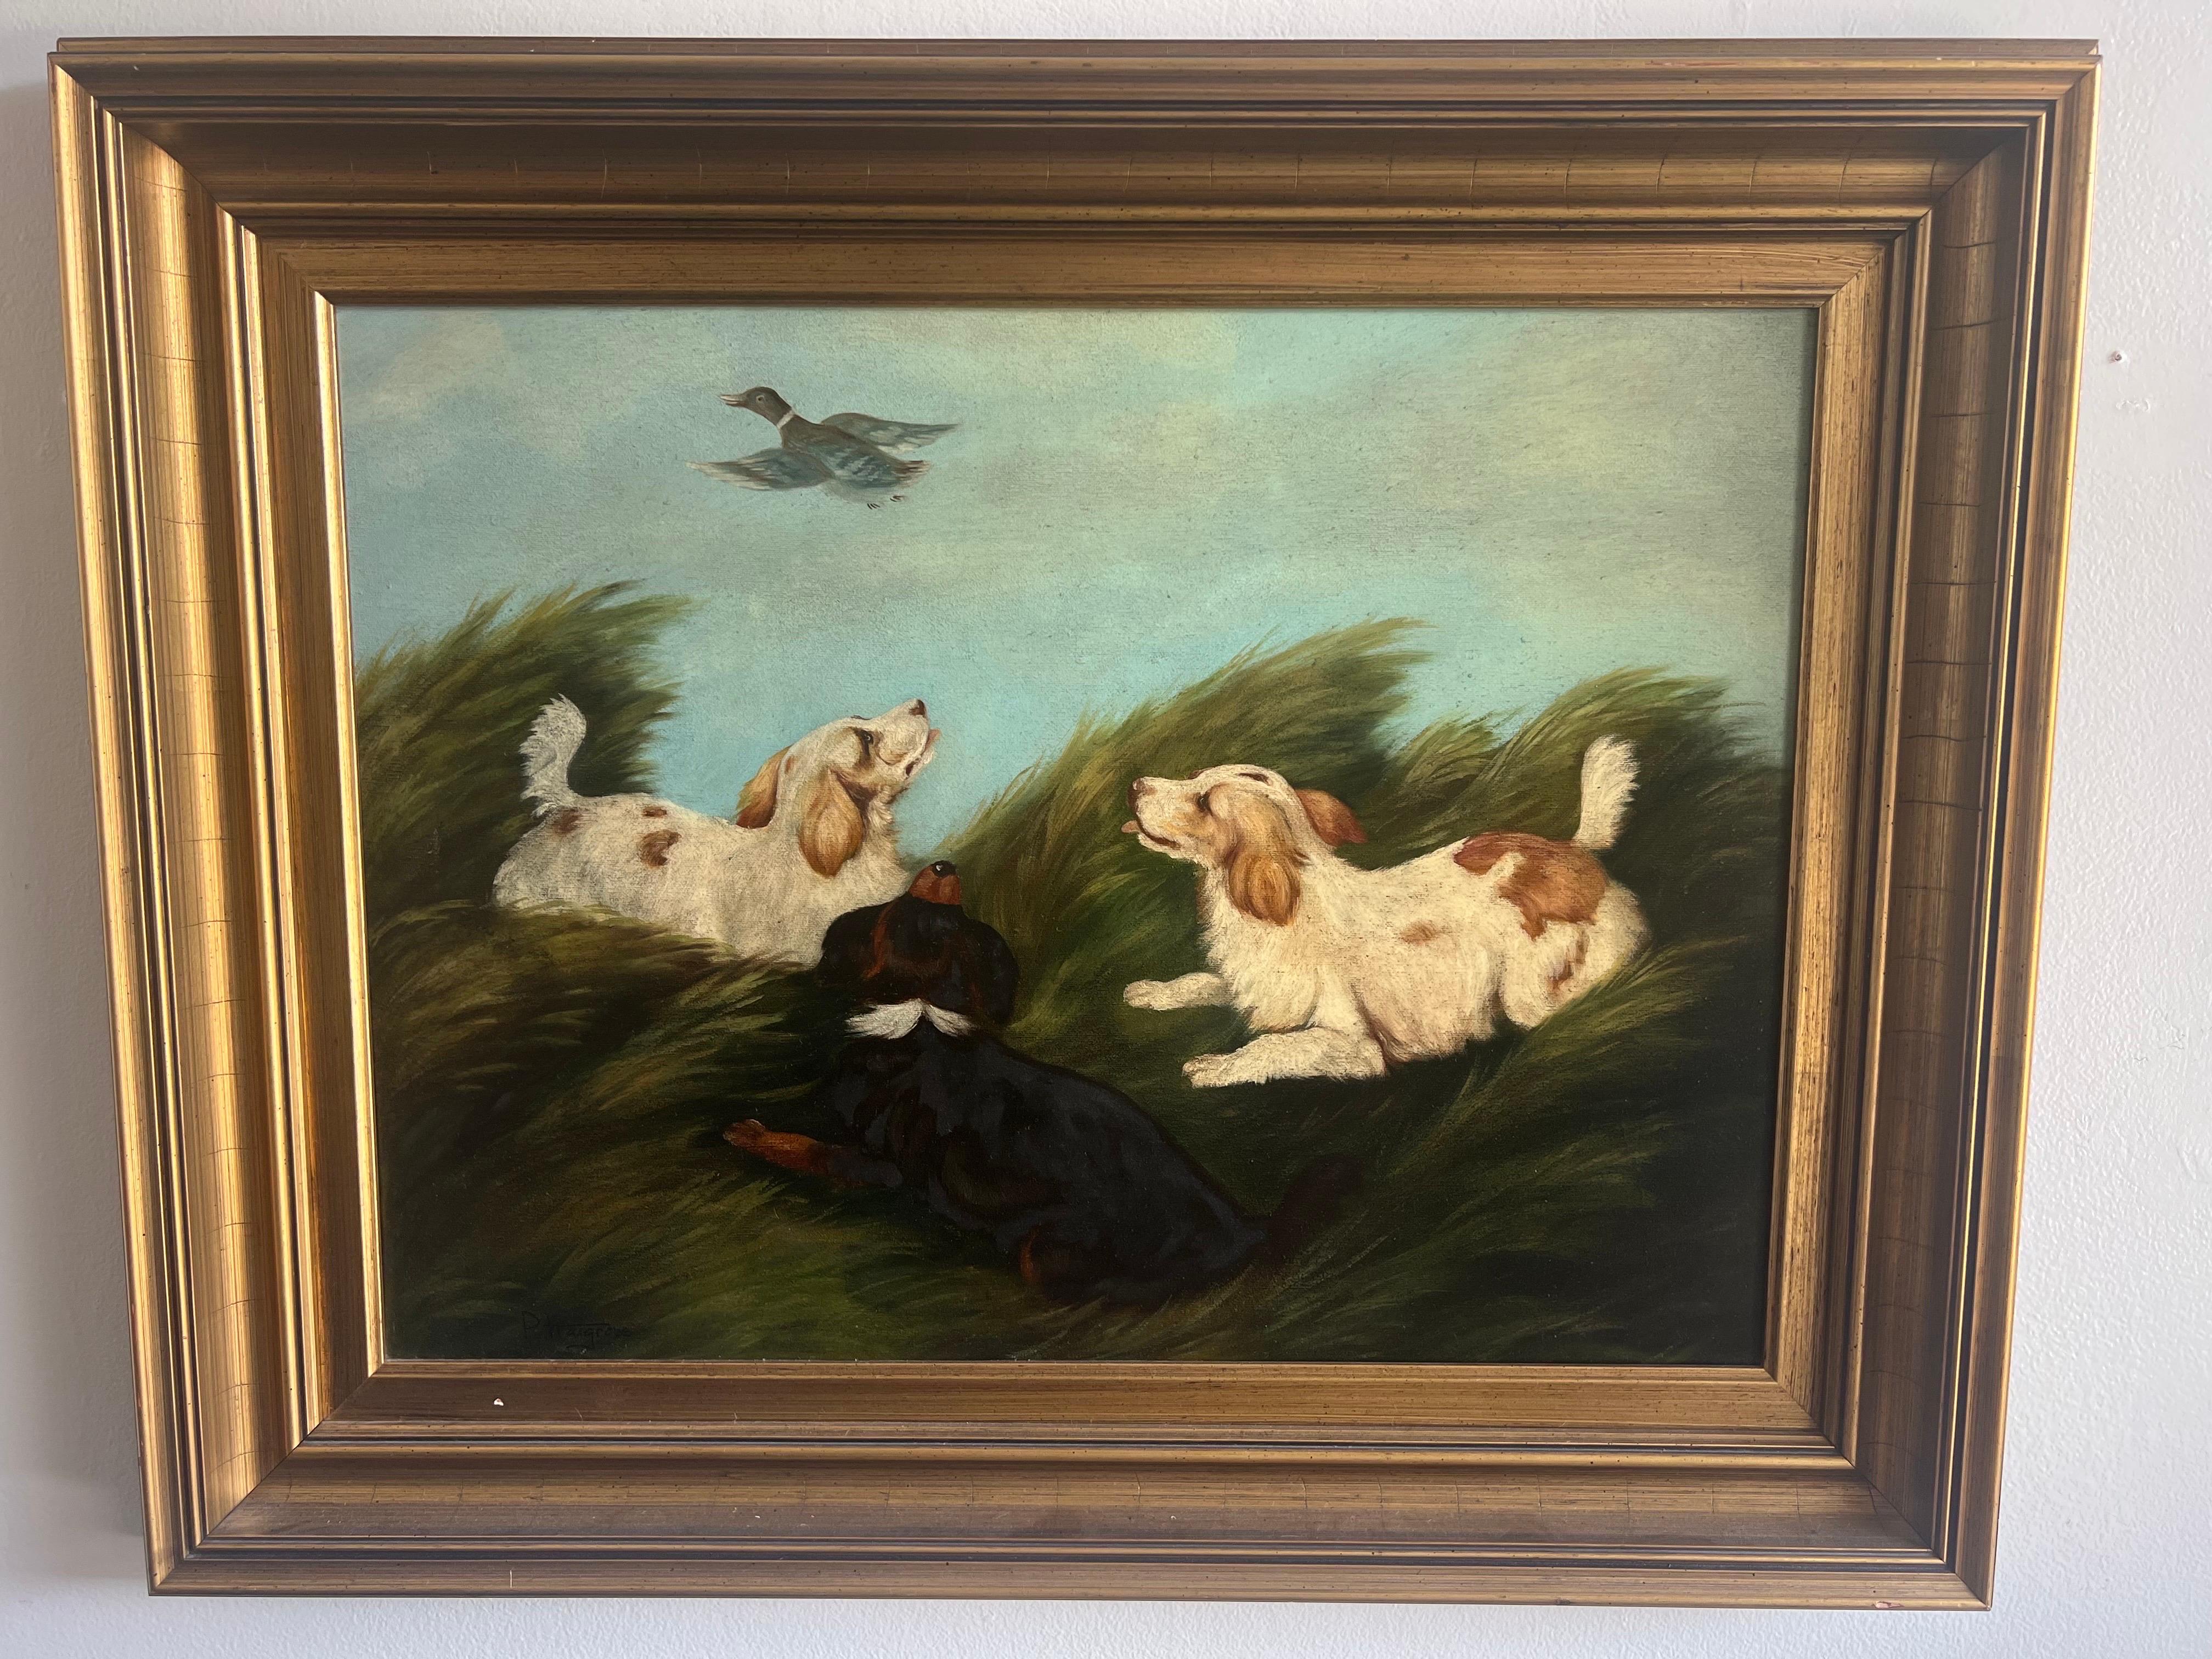 Charming English oil on canvas depicting three Spaniels and a flying duck overhead.  Signed P. Hargrove.  Original gilt frame.